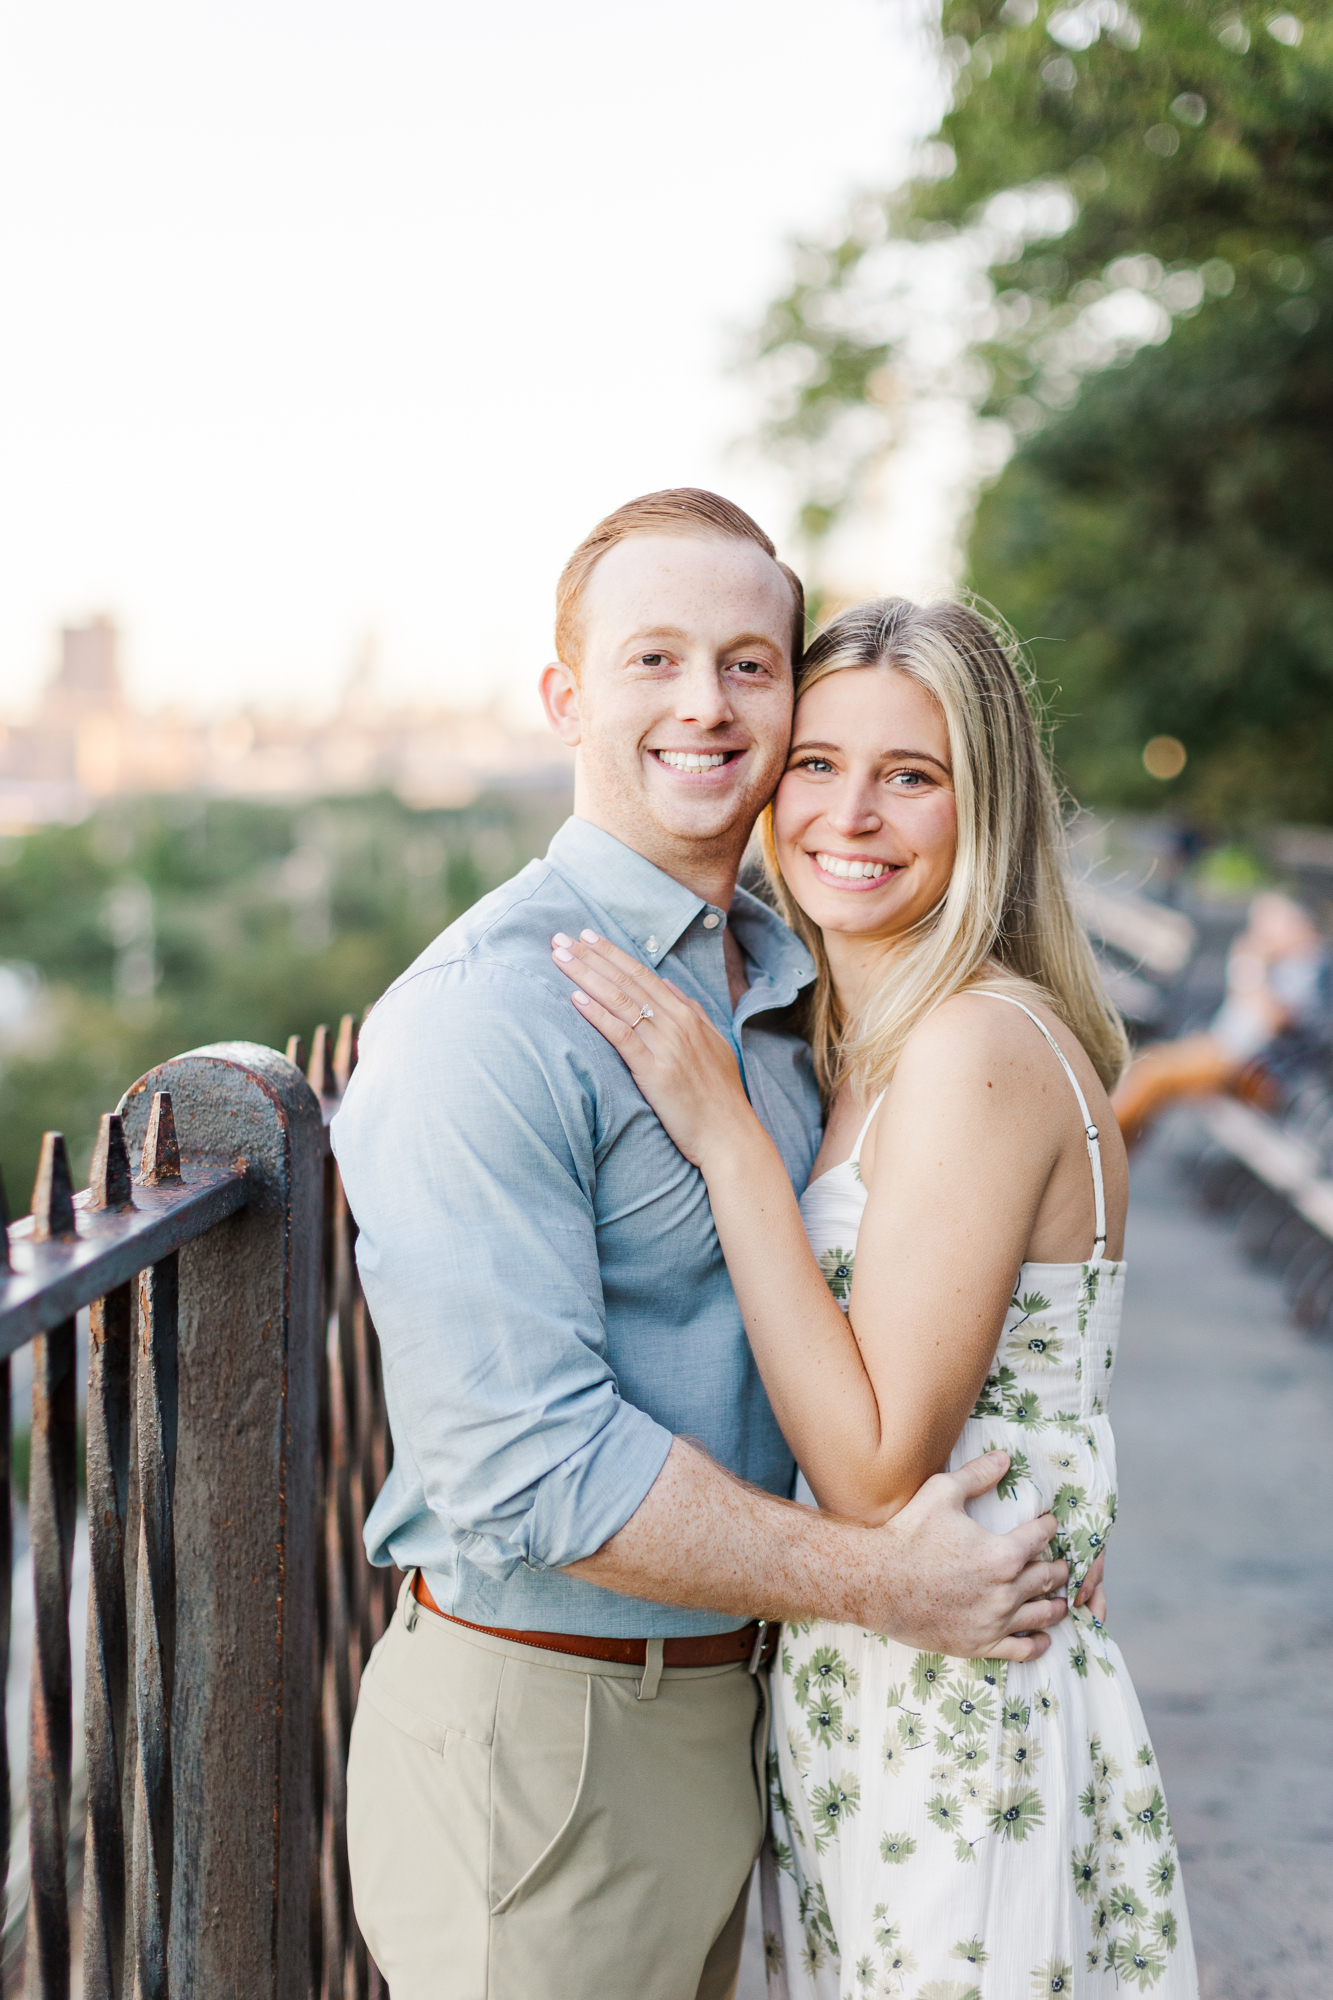 Sweet Engagement Photos In Brooklyn Heights